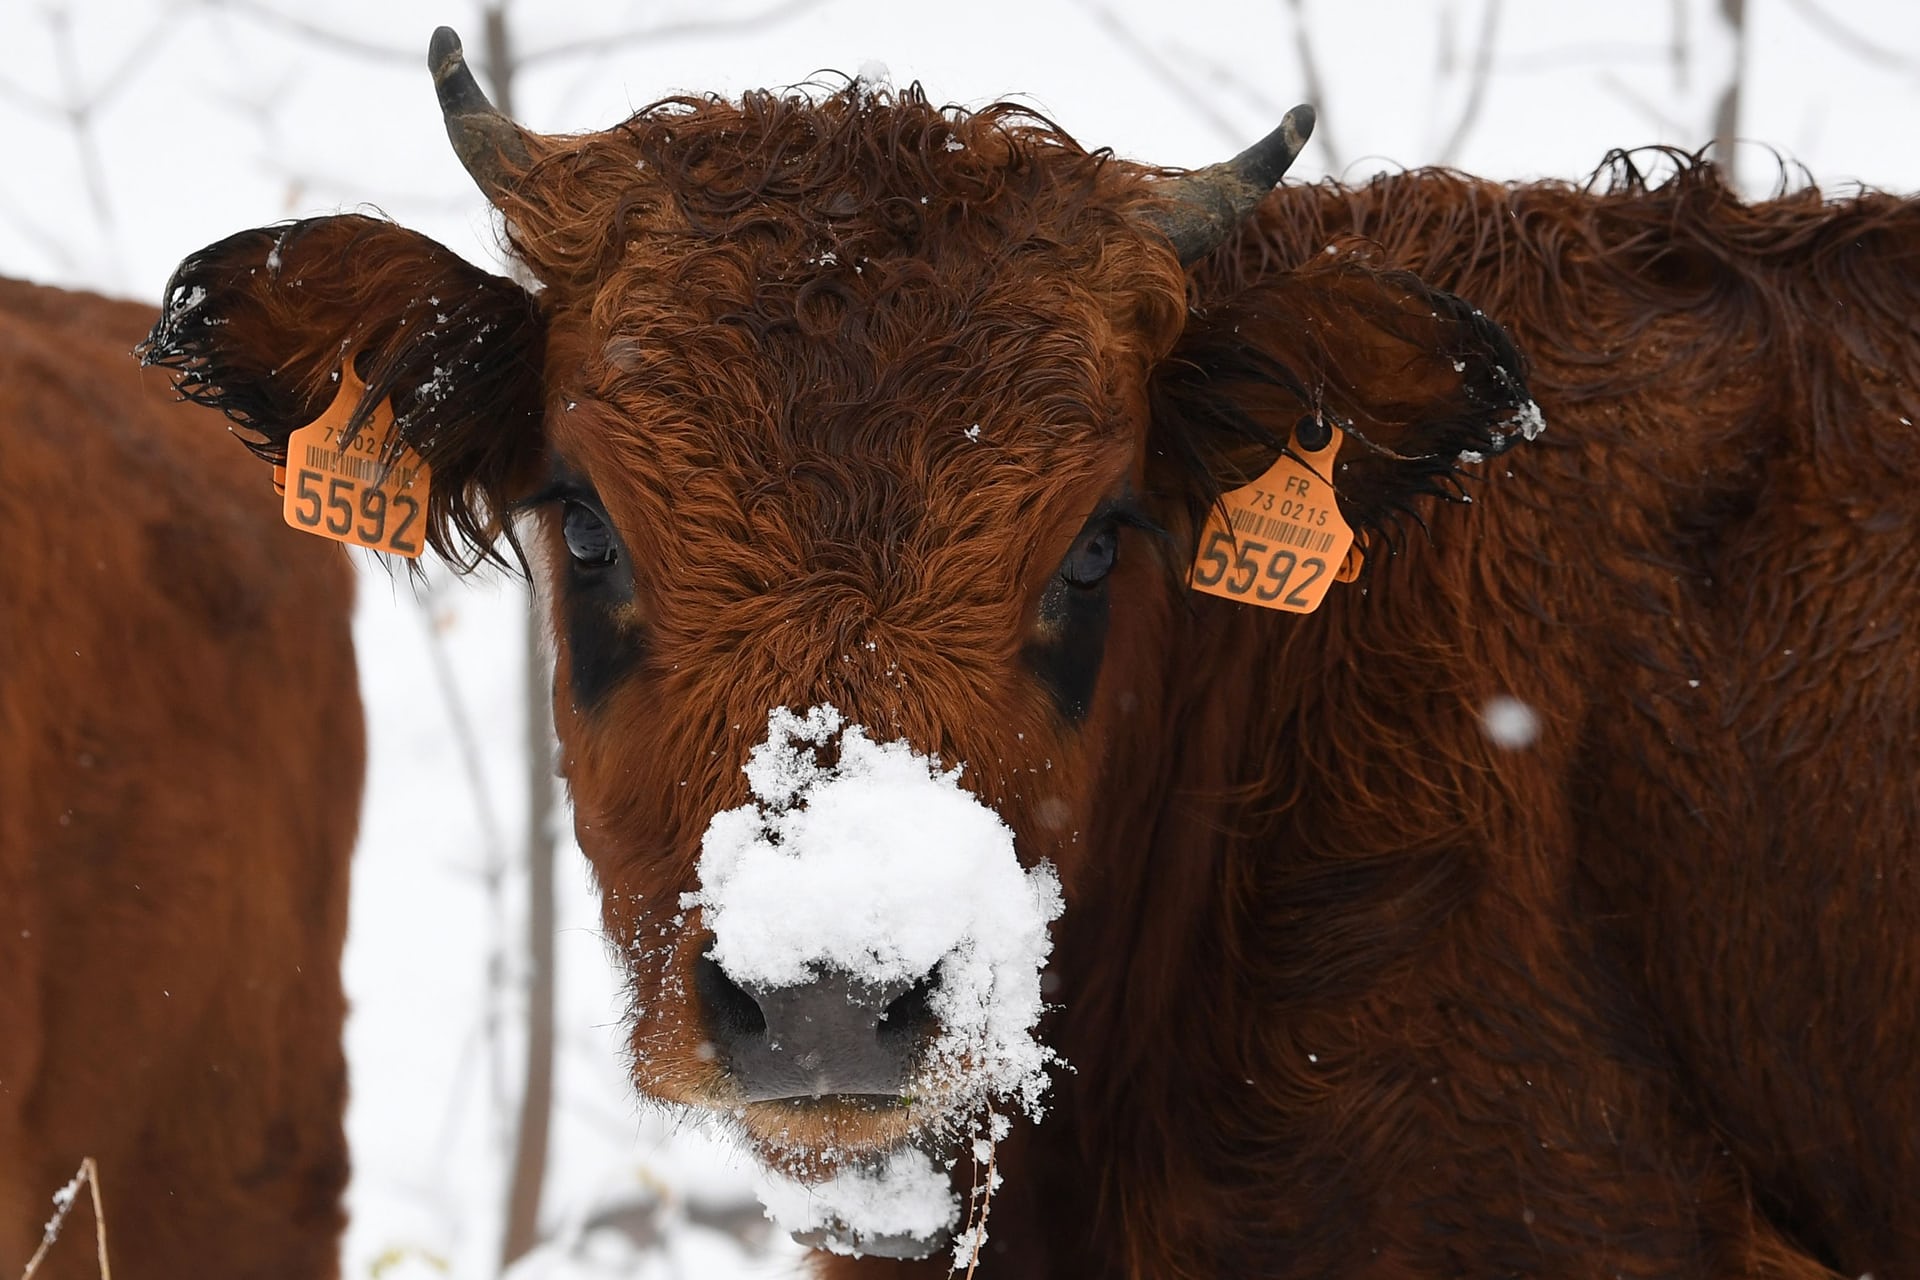 A cow stands in a snow-covered field on the Col de la Madeleine mountain pass in the French Alps, Celliers, France. PHOTO: REUTERS